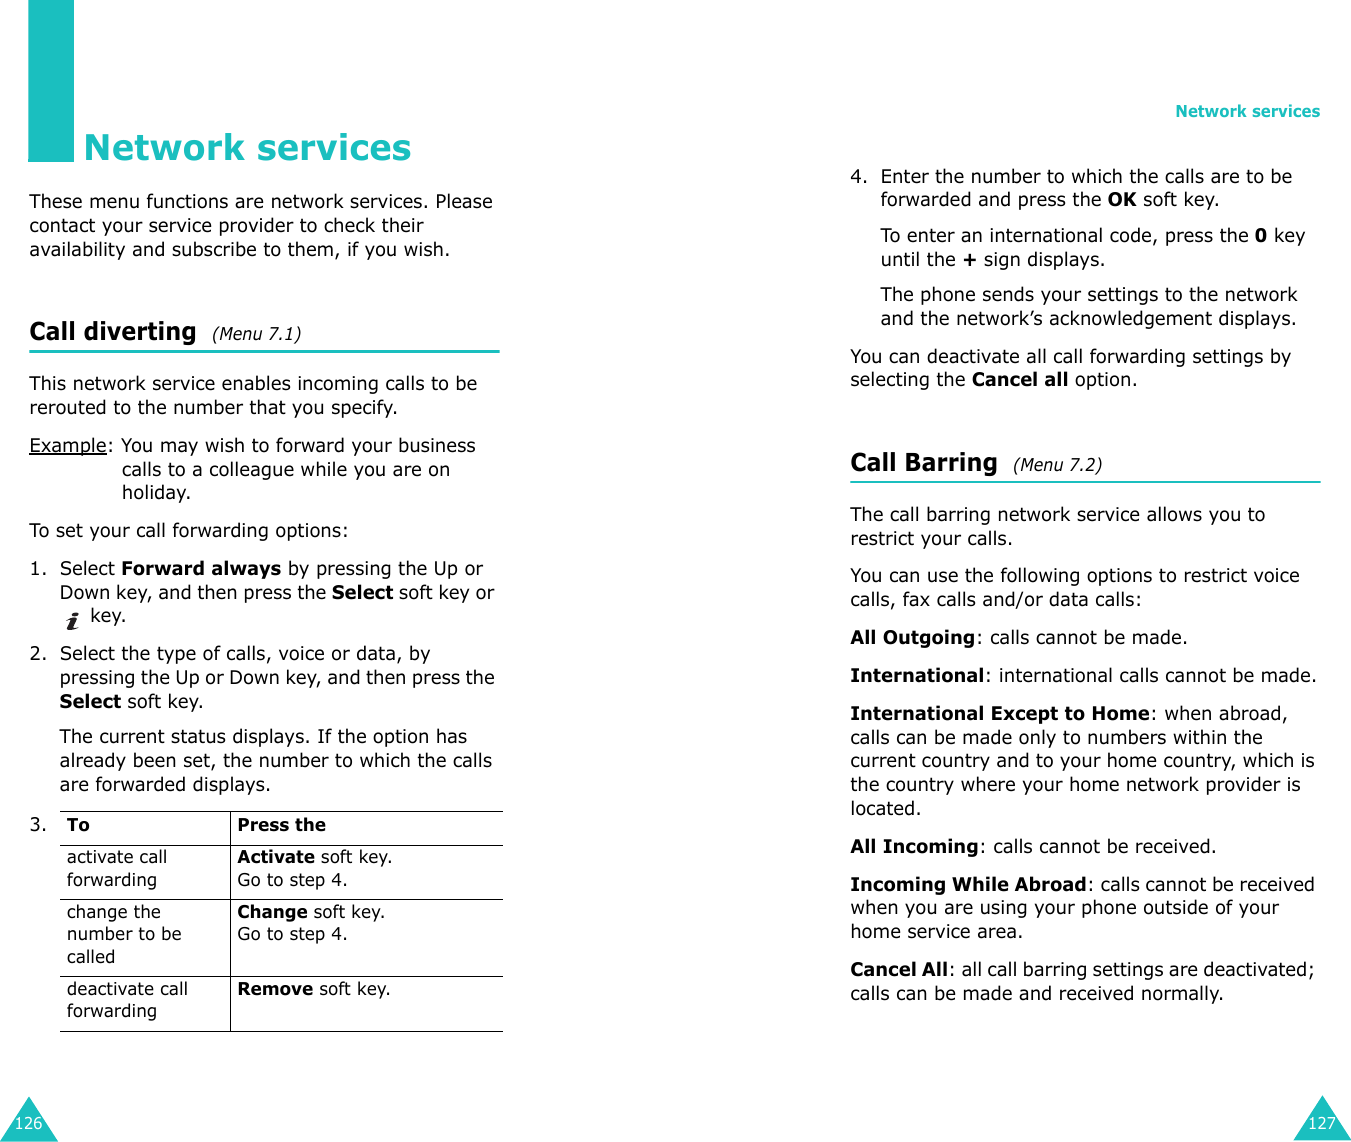 126Network servicesThese menu functions are network services. Please contact your service provider to check their availability and subscribe to them, if you wish.Call diverting  (Menu 7.1)This network service enables incoming calls to be rerouted to the number that you specify.Example: You may wish to forward your business calls to a colleague while you are on holiday.To set your call forwarding options:1. Select Forward always by pressing the Up or Down key, and then press the Select soft key or  key.2. Select the type of calls, voice or data, by pressing the Up or Down key, and then press the Select soft key.The current status displays. If the option has already been set, the number to which the calls are forwarded displays.3.To Press theactivate call forwardingActivate soft key. Go to step 4.change the number to be calledChange soft key.Go to step 4. deactivate call forwardingRemove soft key.Network services1274. Enter the number to which the calls are to be forwarded and press the OK soft key.To enter an international code, press the 0 key until the + sign displays.The phone sends your settings to the network and the network’s acknowledgement displays.You can deactivate all call forwarding settings by selecting the Cancel all option.Call Barring  (Menu 7.2) The call barring network service allows you to restrict your calls.You can use the following options to restrict voice calls, fax calls and/or data calls:All Outgoing: calls cannot be made.International: international calls cannot be made.International Except to Home: when abroad, calls can be made only to numbers within the current country and to your home country, which is the country where your home network provider is located.All Incoming: calls cannot be received.Incoming While Abroad: calls cannot be received when you are using your phone outside of your home service area.Cancel All: all call barring settings are deactivated; calls can be made and received normally.